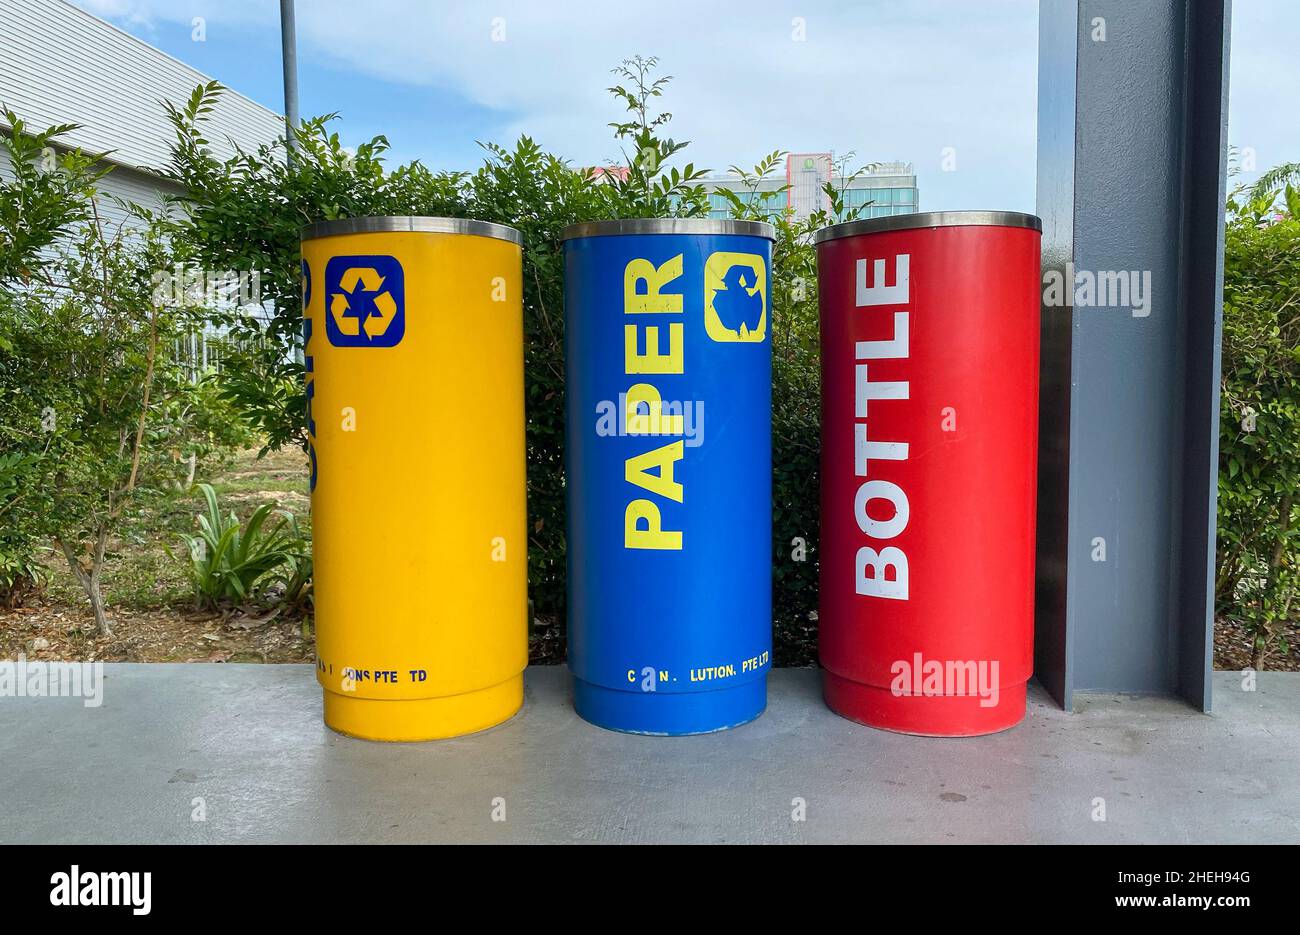 Singapore - Feb 12, 2020. Colorful trash cans on the street in Singapore. Singapore is one of the best waste sorting countries in the world. Stock Photo